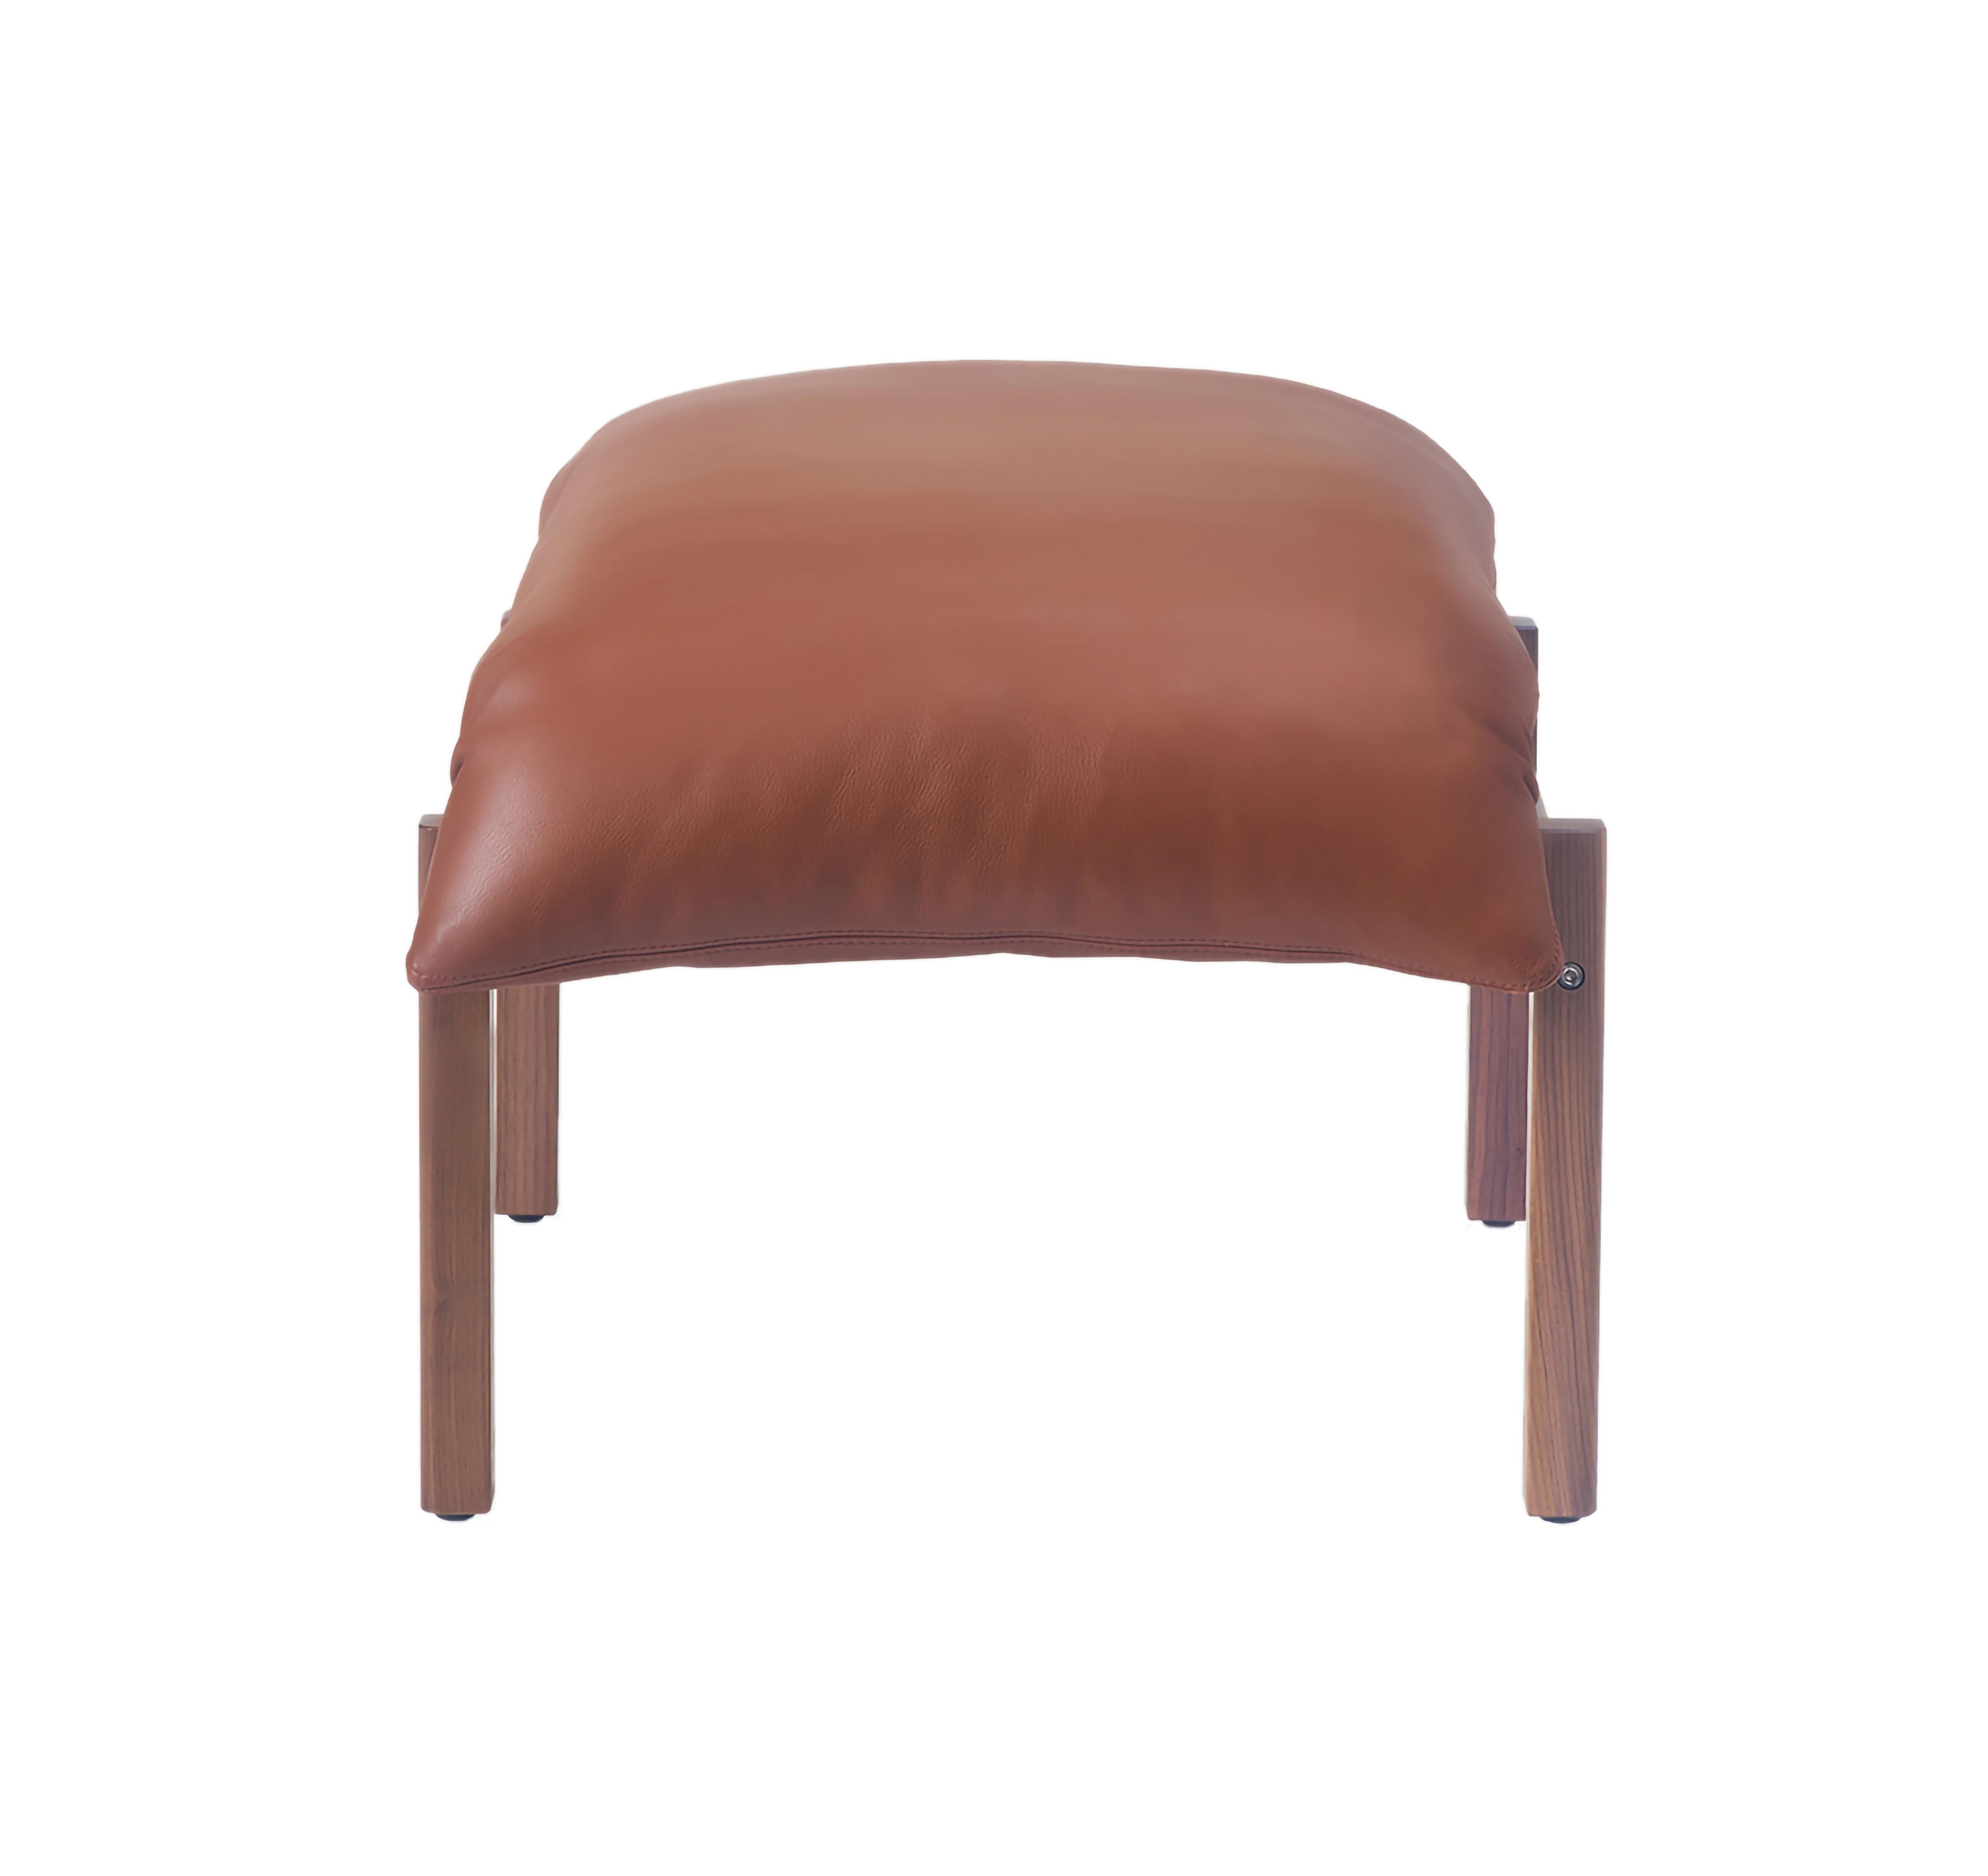 For Sale: Brown (Comfort 33286 Chestnut Brown) Sling Ottoman in Solid Walnut, Satin Nickel and Leather Designed by Craig Bassam 2